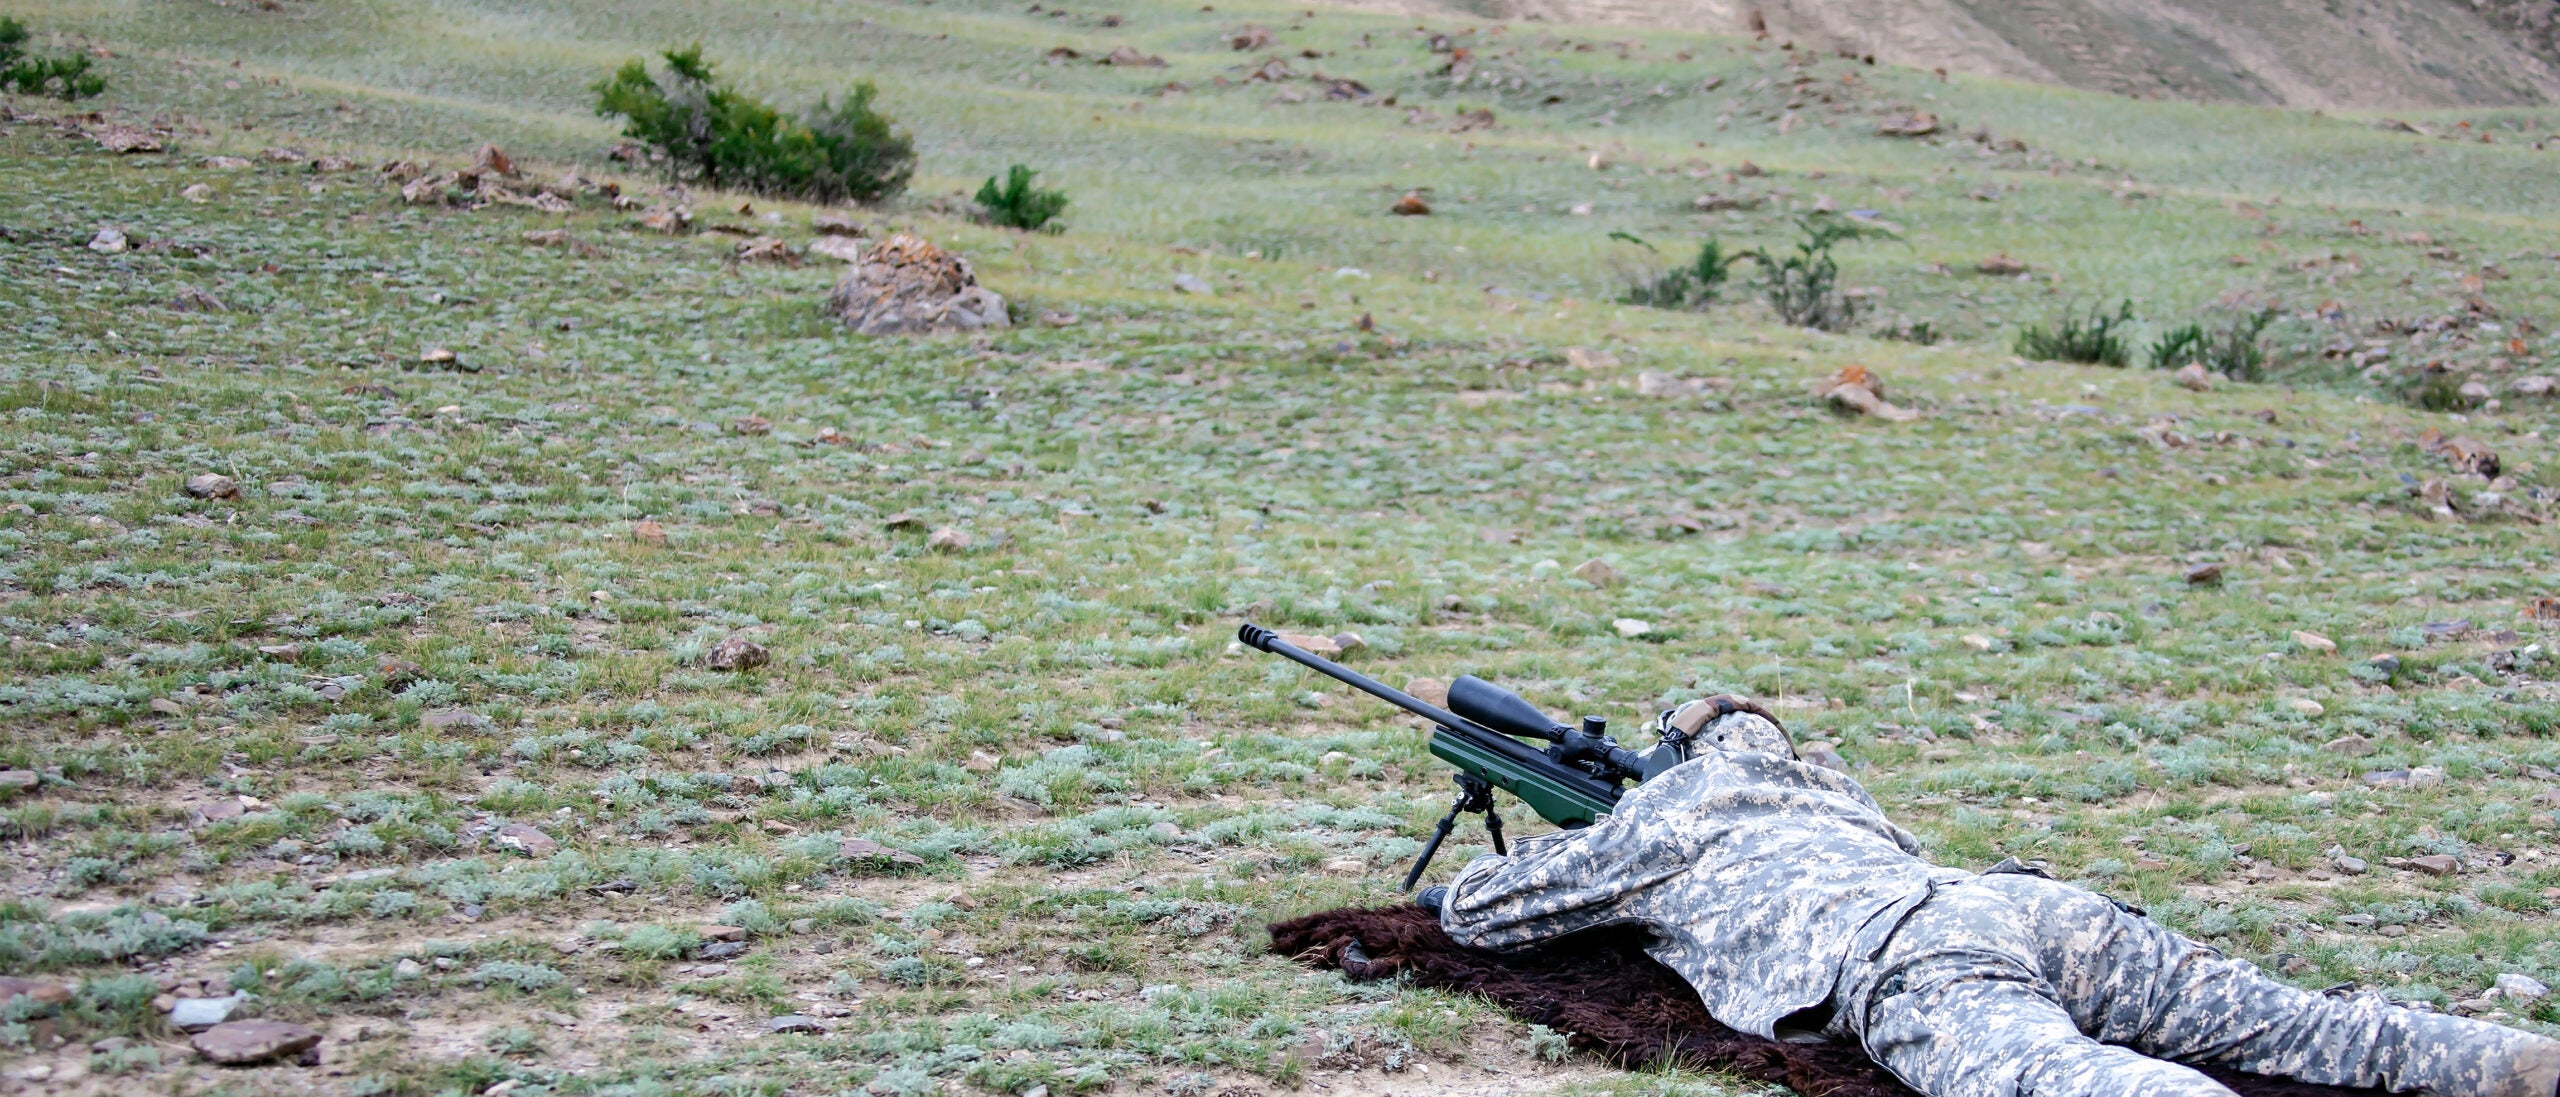 A shooter fires a long range rifle from the prone position in a field